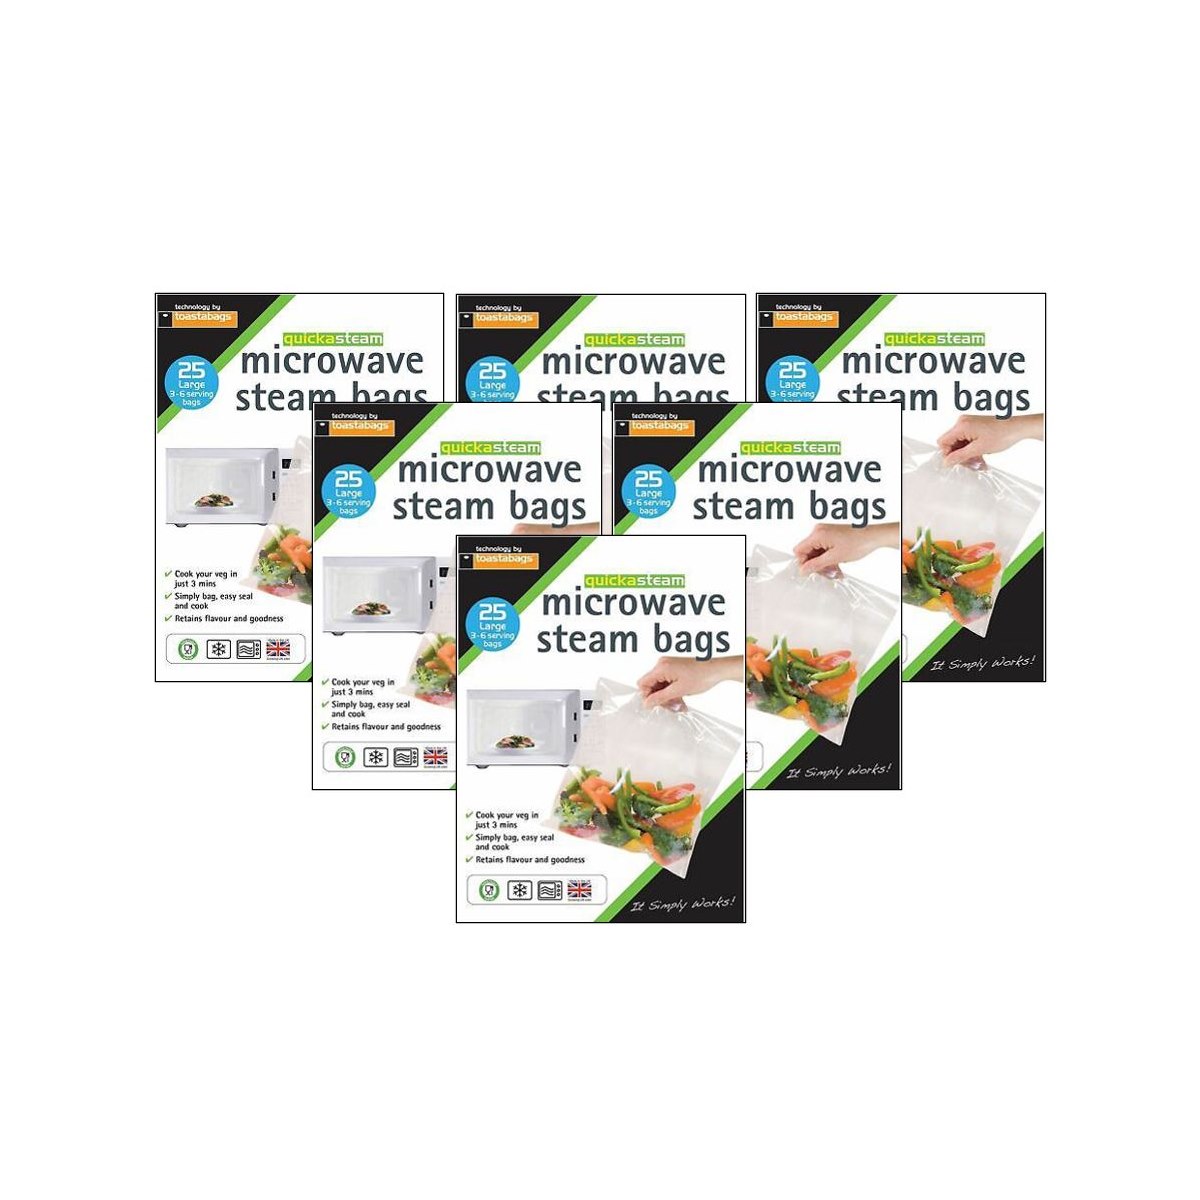 Case of 6 x Toastabags Quickasteam Microwave Steam Bags 25 Large